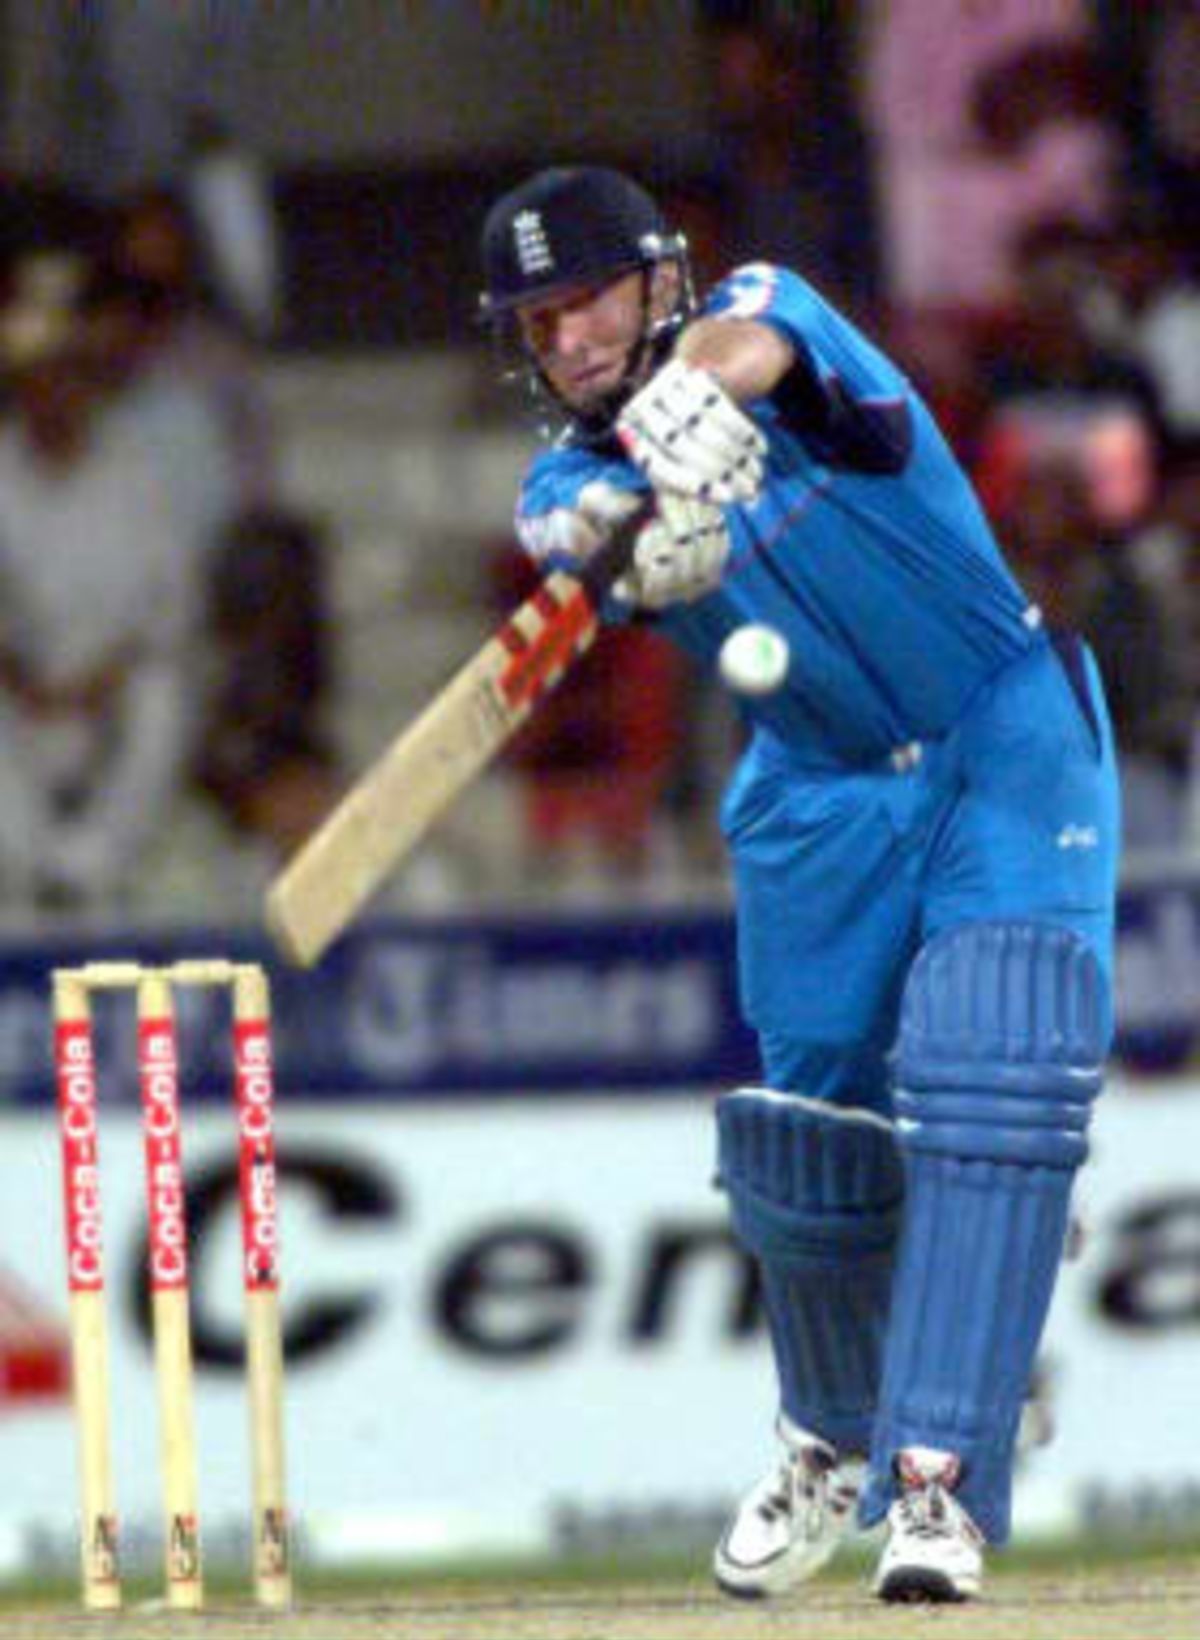 England's Vincent Wells batting in the 4th match of the Pepsi Cup against India played in Sharjah, U.A.E. on 11th April 1999.